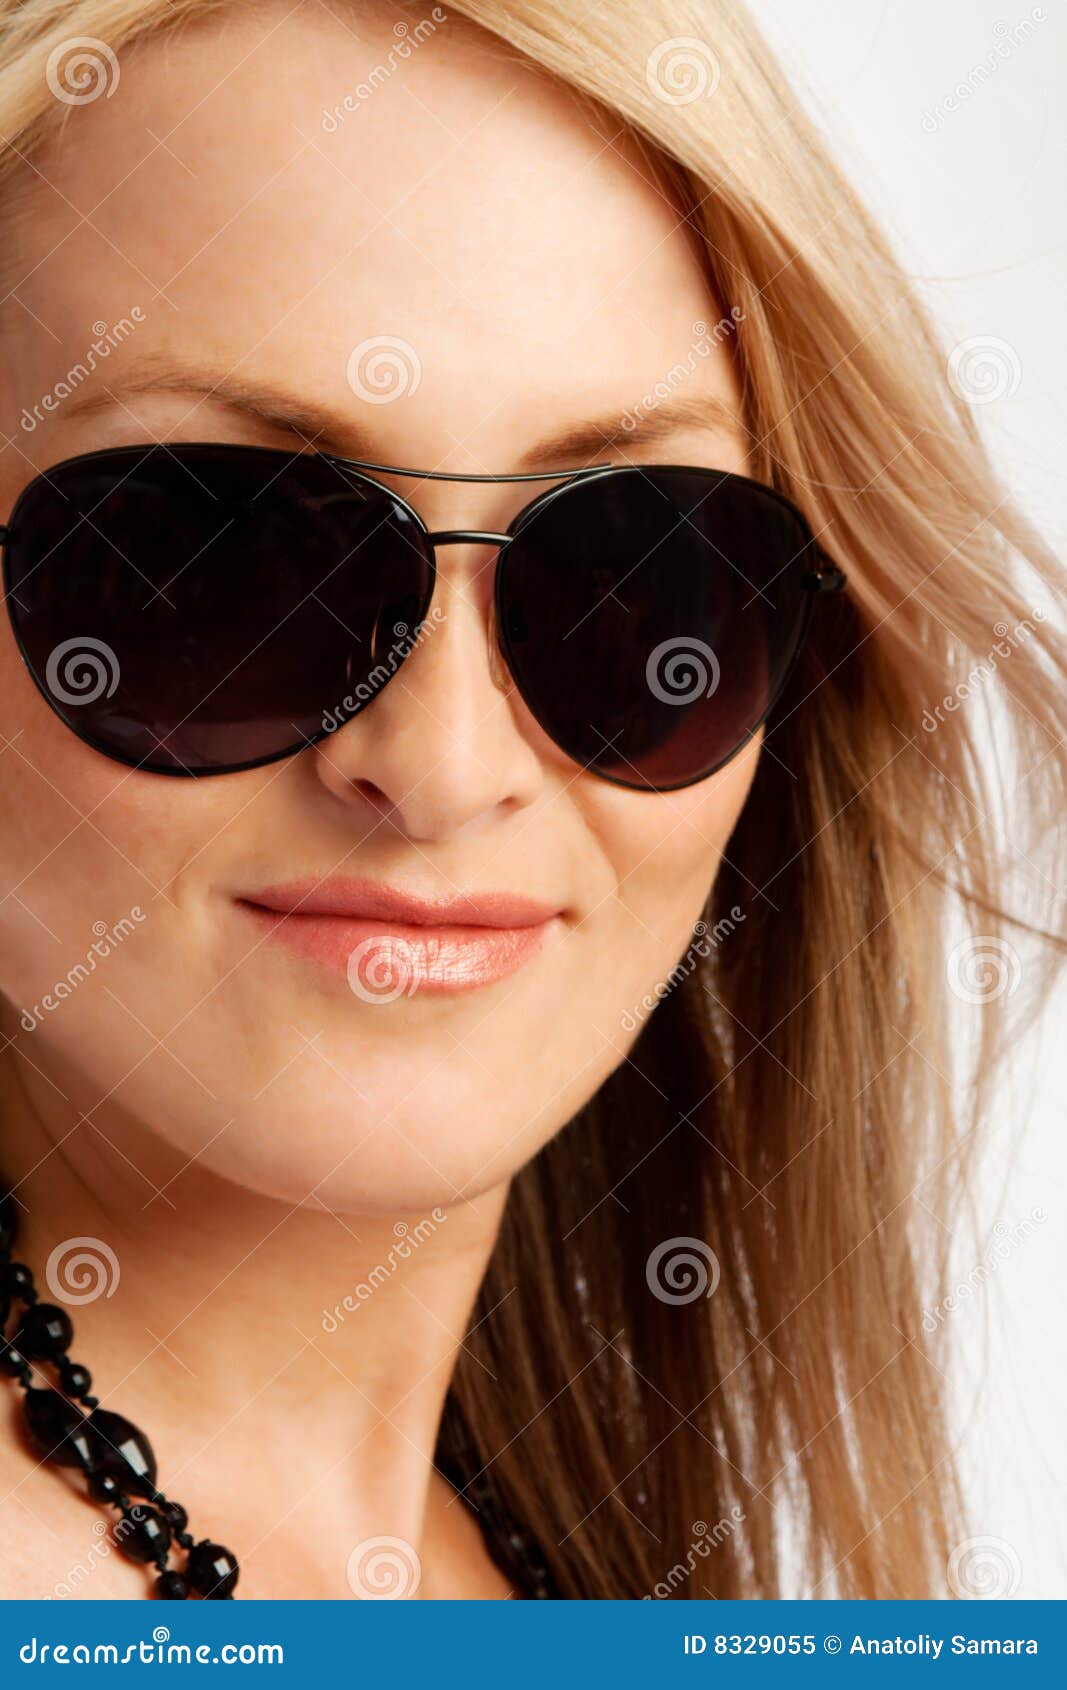 Blond Lady In Sunglasses Stock Image Image Of Vogue Sunglasses 8329055 